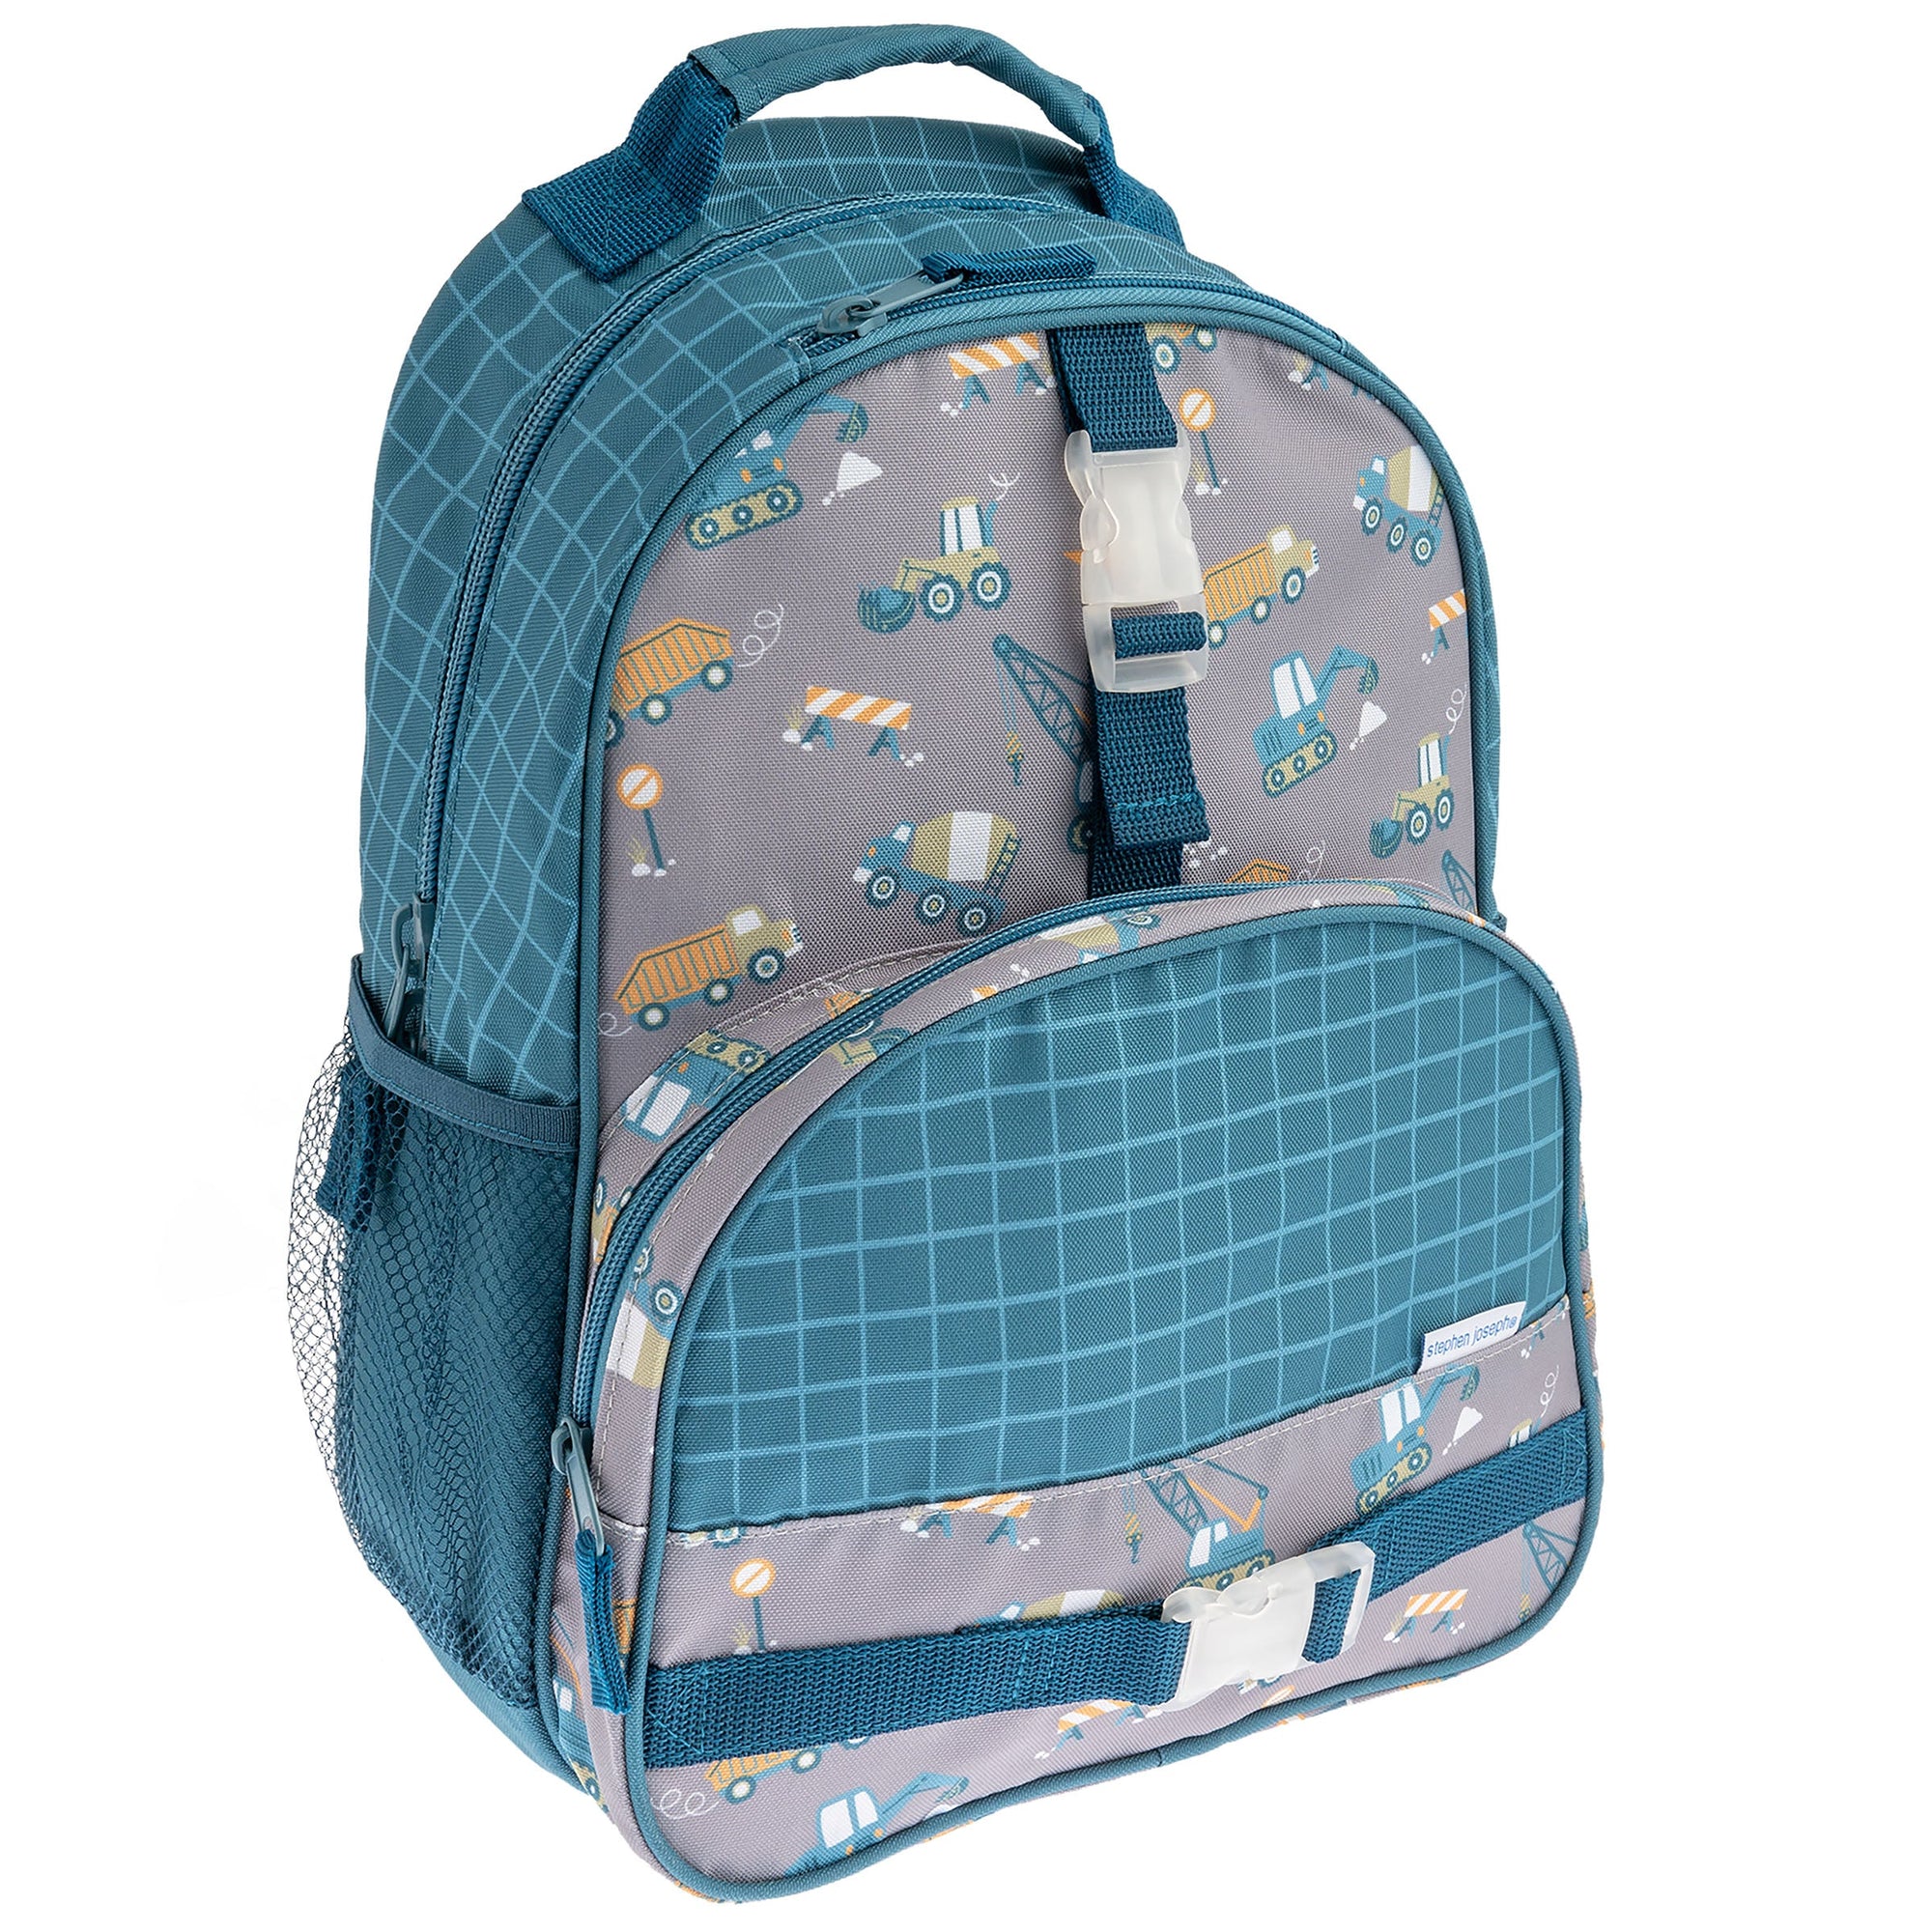 Construction All Over Print Backpack